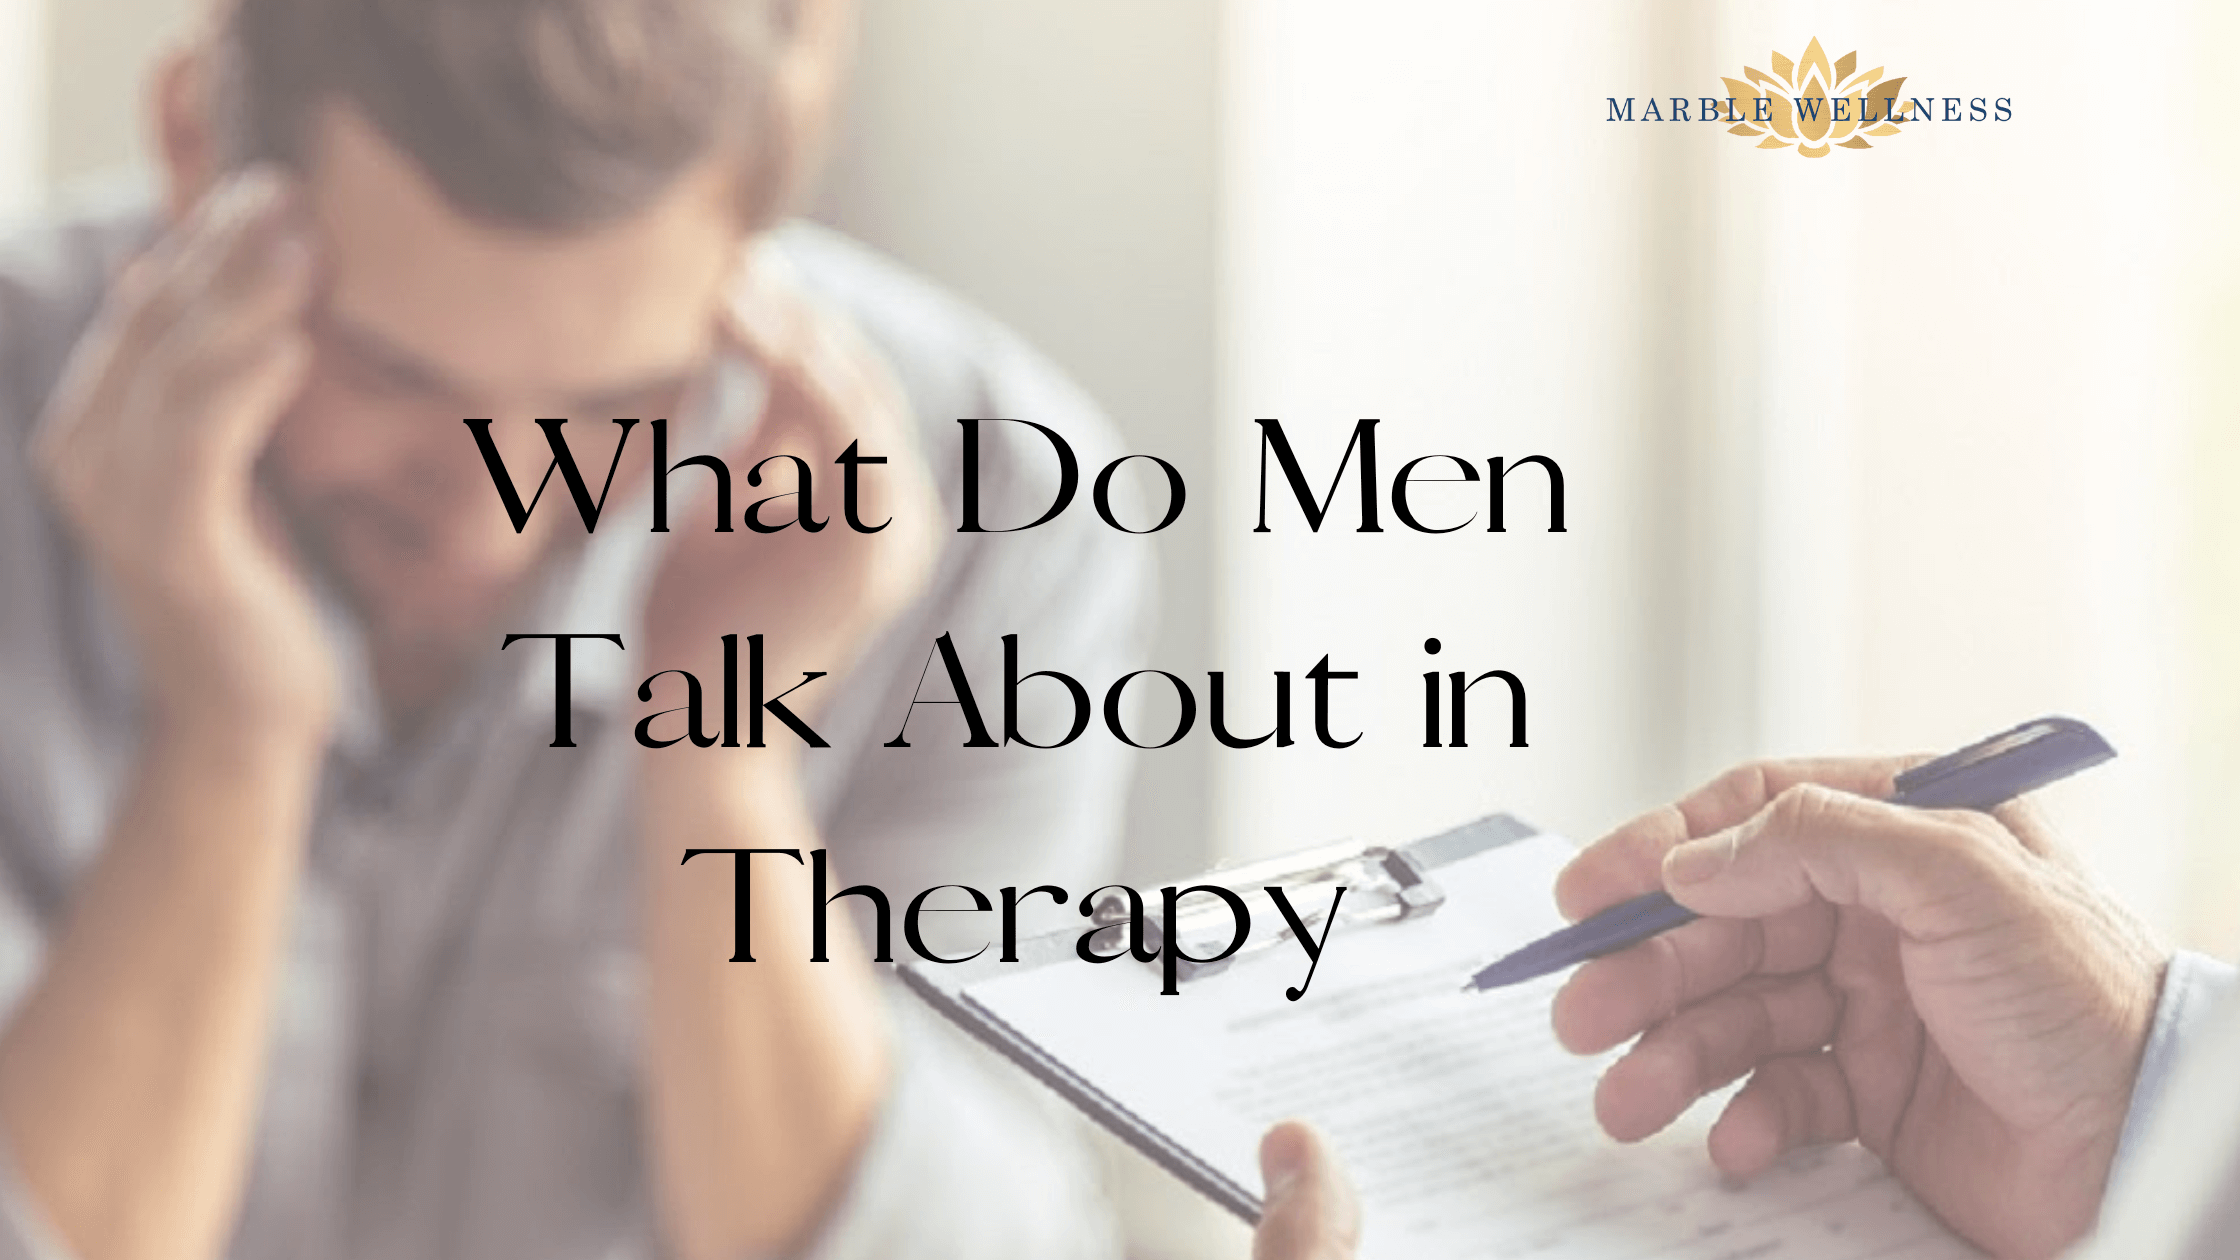 Cover art for "What Do Men Talk About in Therapy?". Marble Wellness is located in West County, MO 63011 and specializes in therapy for men and much more.